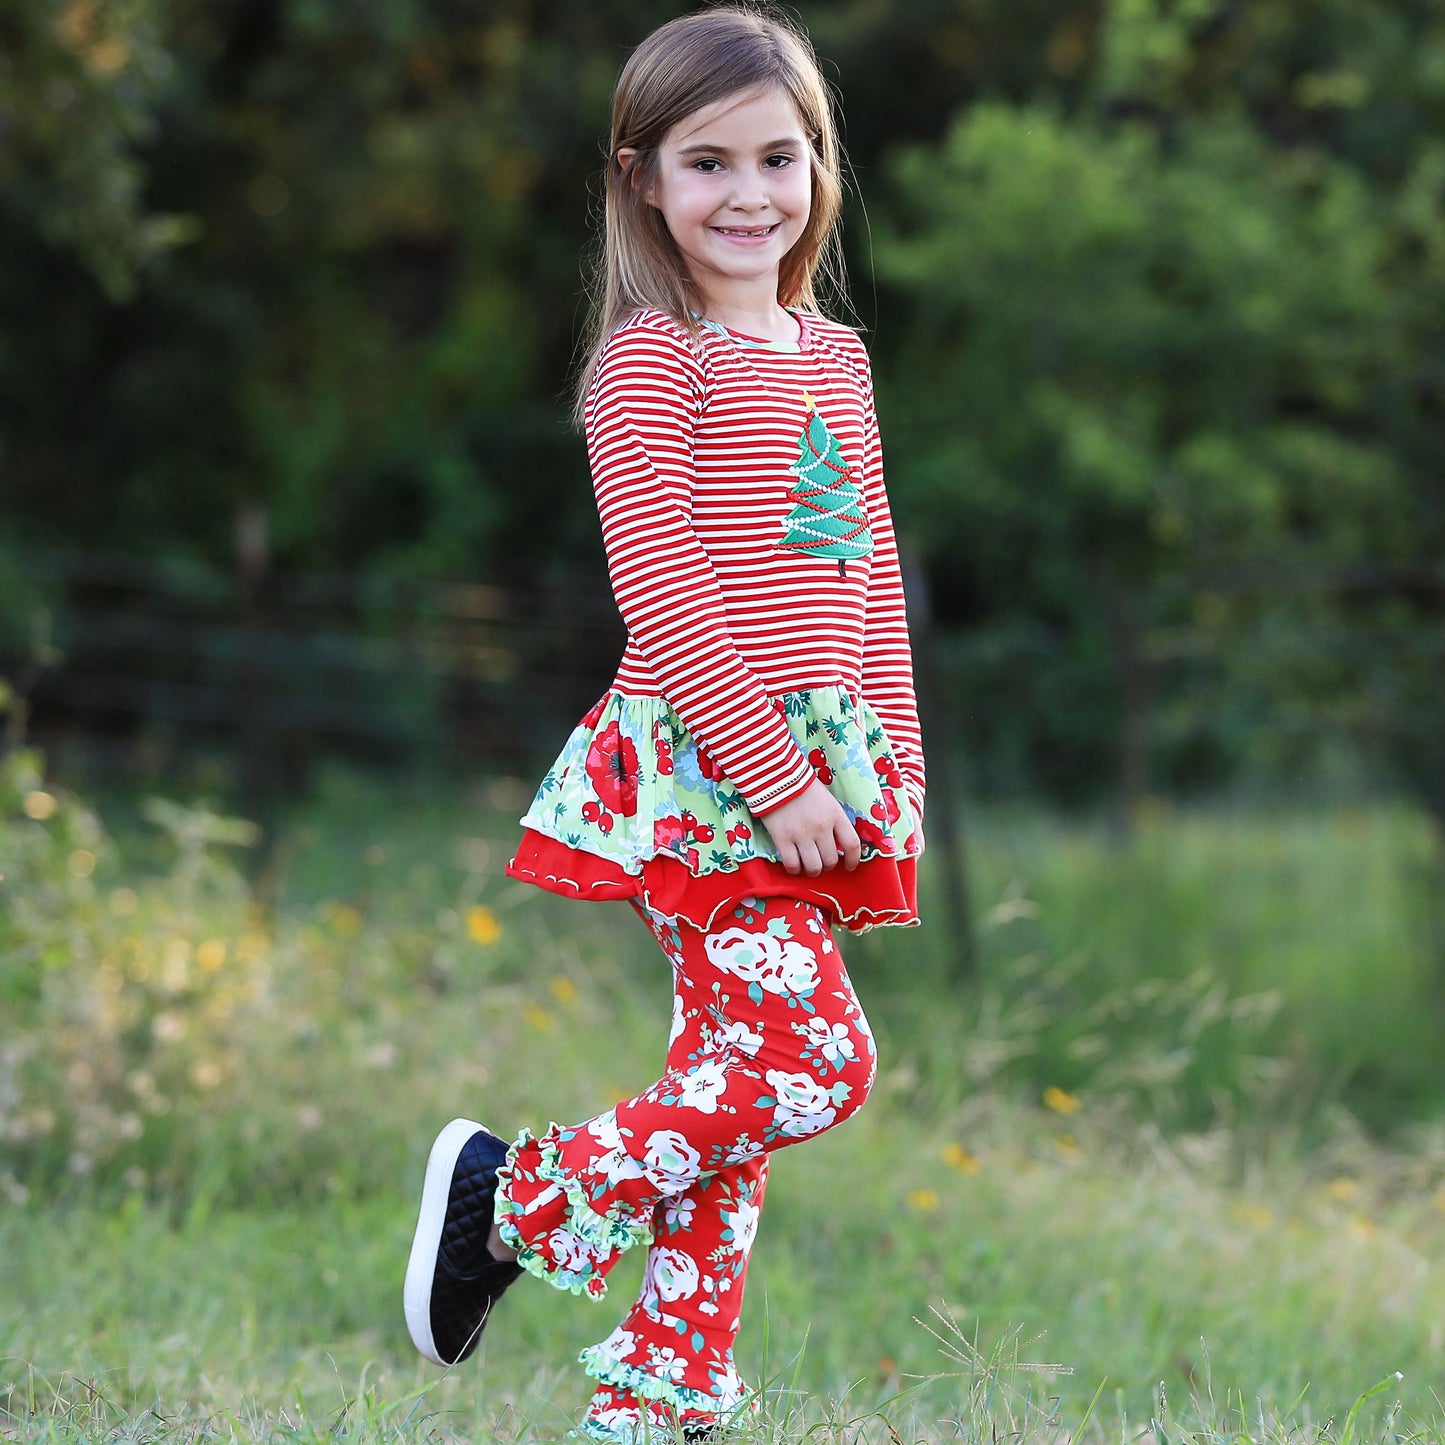 Girls Boutique Christmas Tree Holiday Tunic and Floral Ruffle